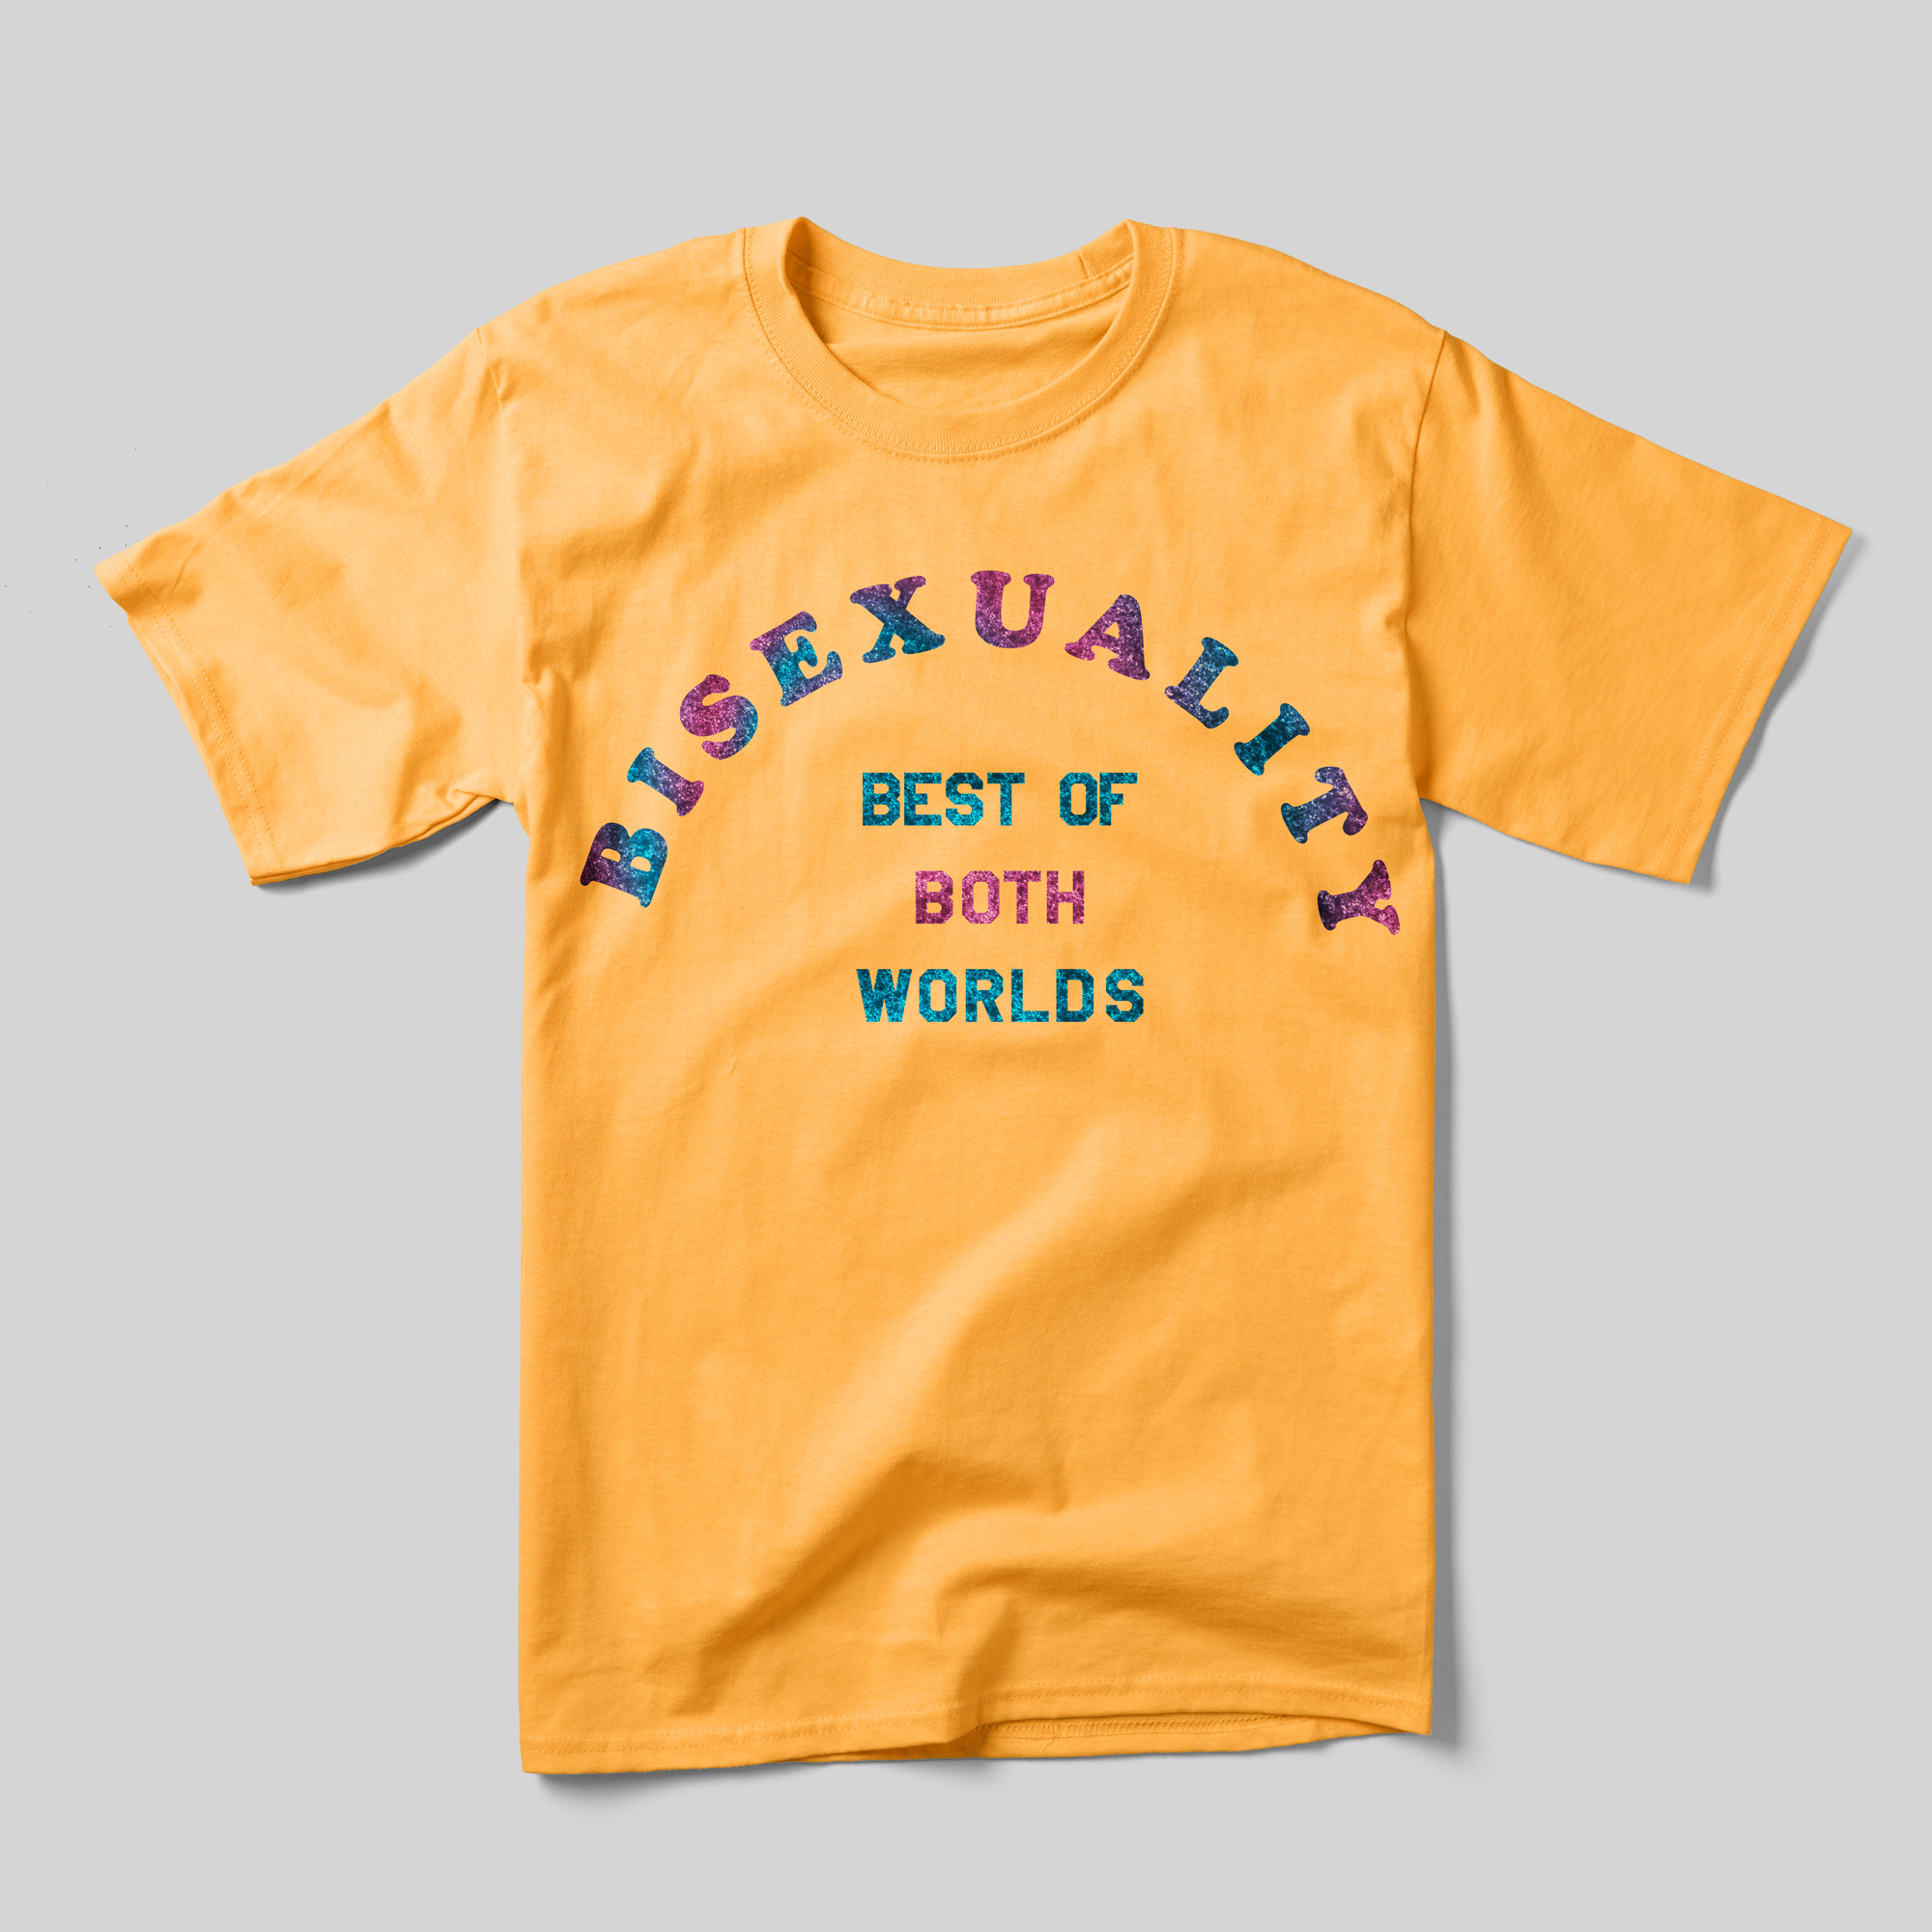 A gold-yellow t-shirt that reads, in glittery blue and purple text, Bisexuality Best of Both Worlds.